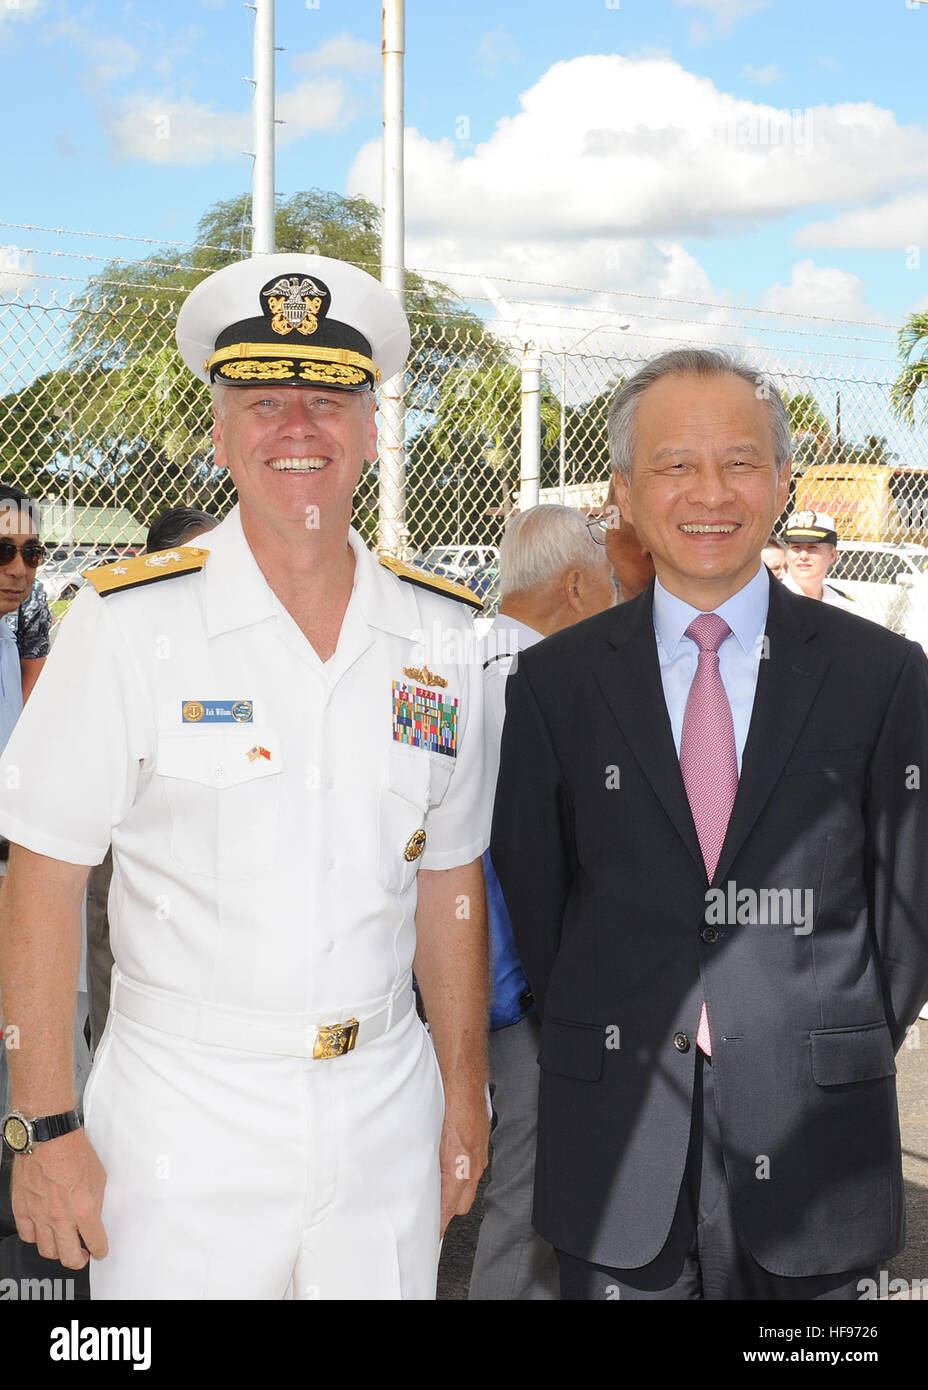 130906-N-ZK021-006 – PEARL HARBOR-HICKAM (Sept. 6, 2013) – Rear Adm. Rick Williams, commander, Navy Region Hawaii and Naval Surface Group Middle Pacific interacts with Ambassador Cui Tiankai, Embassy of China in Washington, DC during an arrival ceremony for three People’s Liberation Army-Navy ships Luhu-class destroyer Qingdao (DDG 113), Jiangkai-class frigate Linyi (FFG 547) and a Fuqing-class fleet oiler as they arrive in Hawaii for a scheduled port visit. Over the weekend, Chinese and U.S. leaders will conduct dialogues to build confidence and mutual understanding between the two nations. T Stock Photo